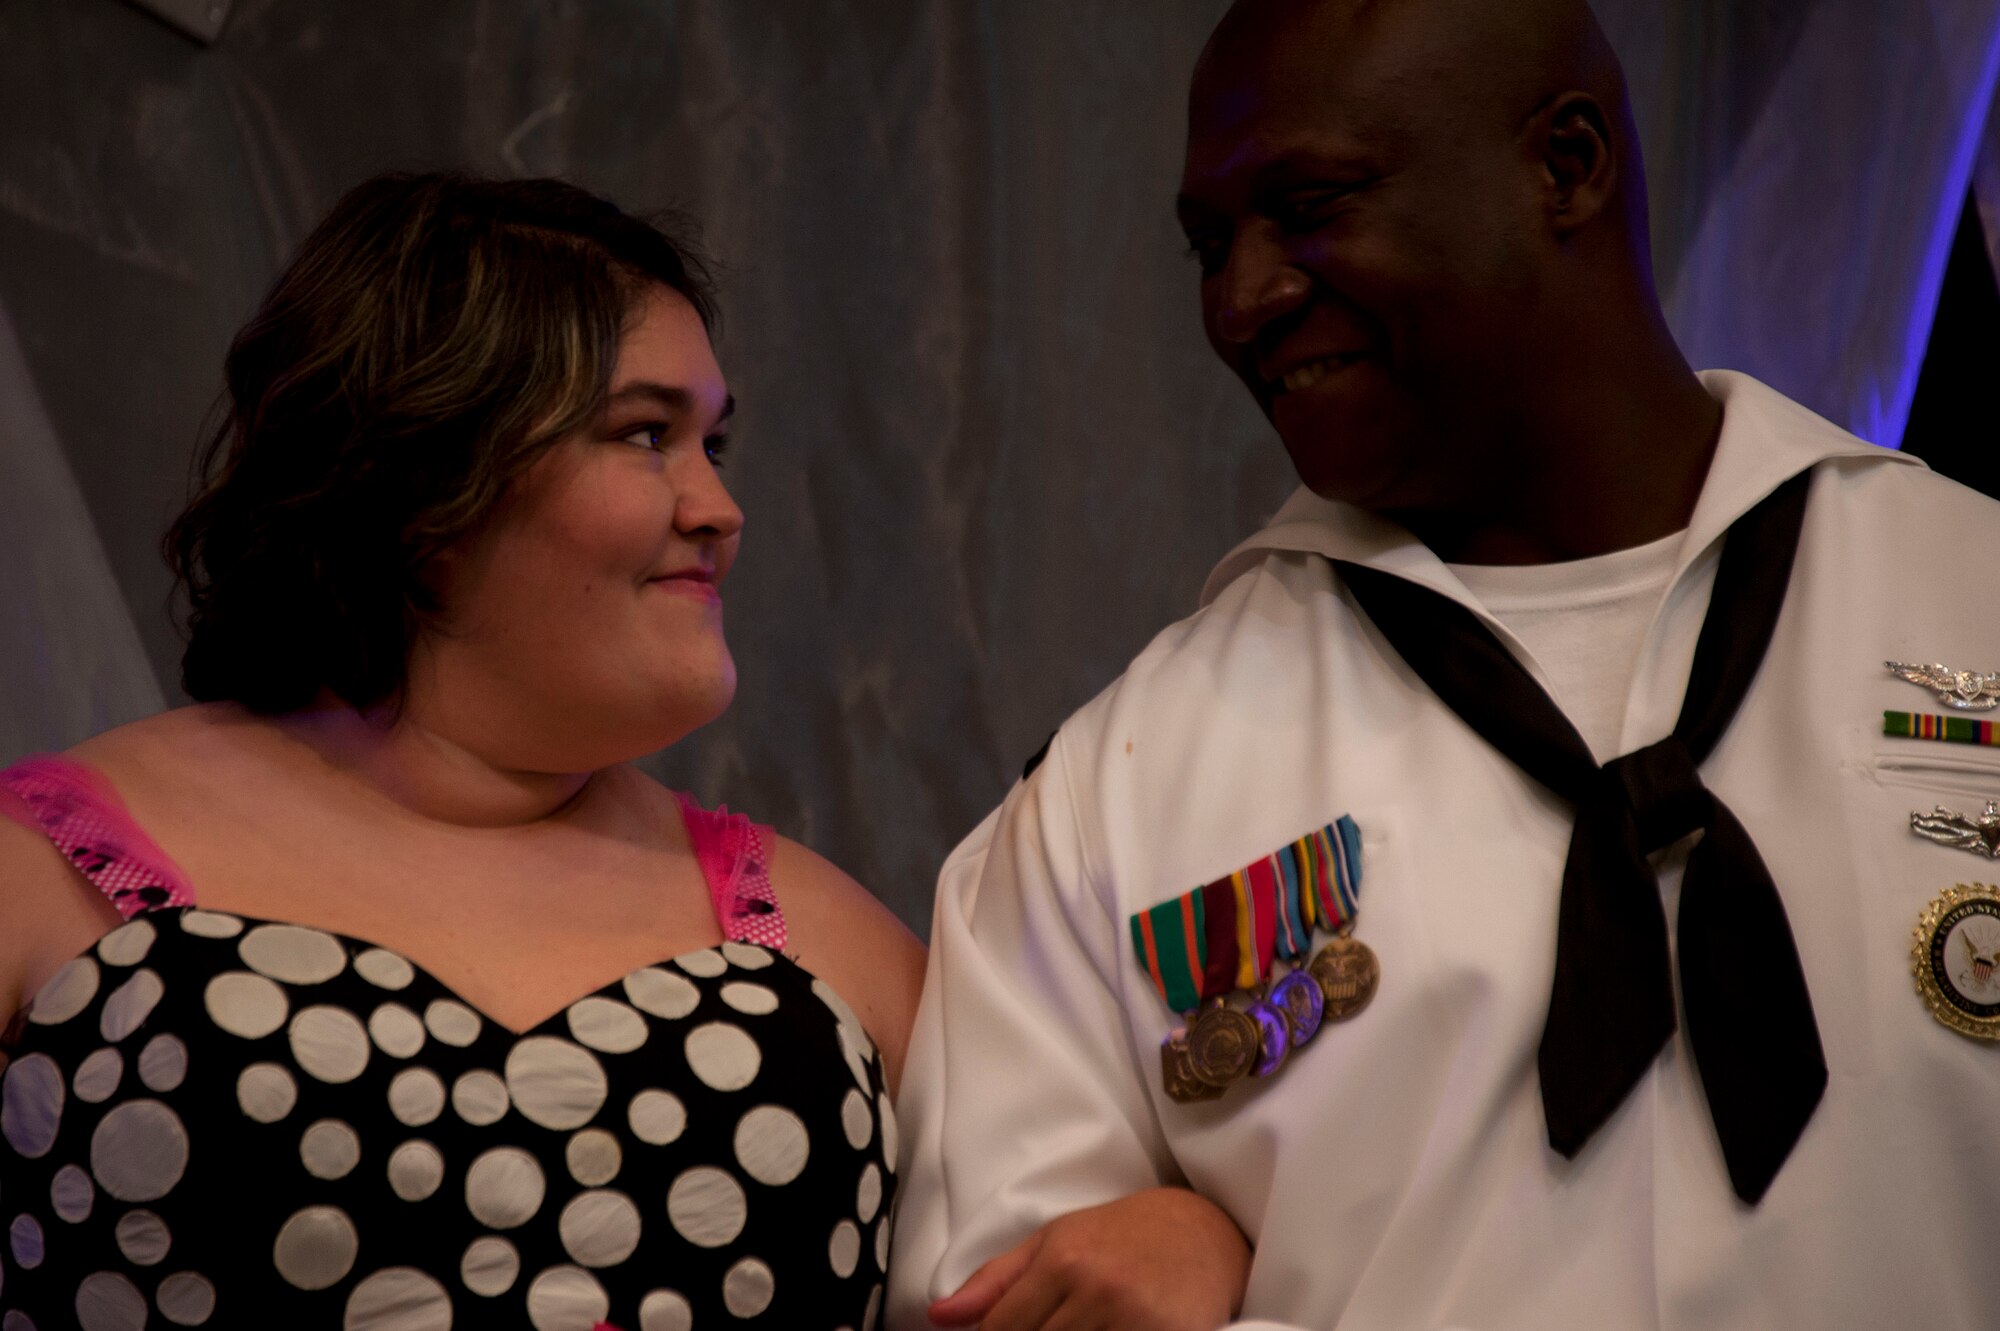 Samantha Brasher looks to Petty Officer 1st Class Demetrius Wimberly, a military volunteer, at the Alabama Angels Pageant July 26, 2014. The pageant recognizes special needs people of all ages for their abilities rather than disabilities. Each participant is crowned with a title reflecting something unique about them. Brasher was crowned, “Miss Ambassador of Angels.” (U.S. Air Force photo by Staff Sgt. Natasha Stannard)